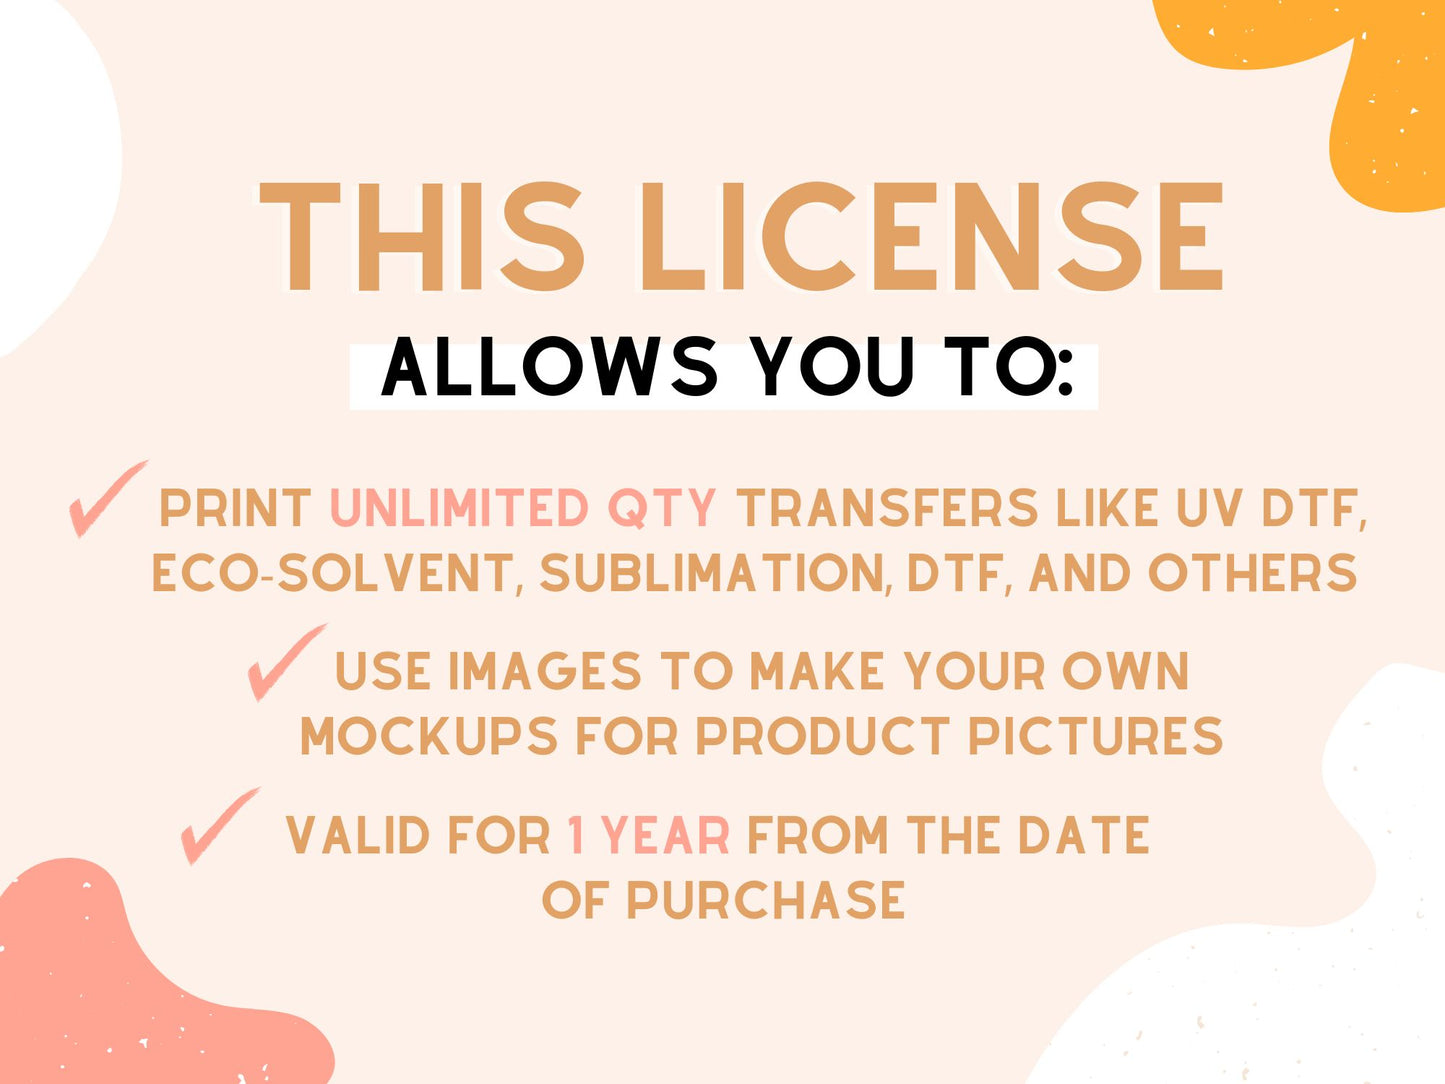 EXTENDED LICENSE | THREE DESIGNS